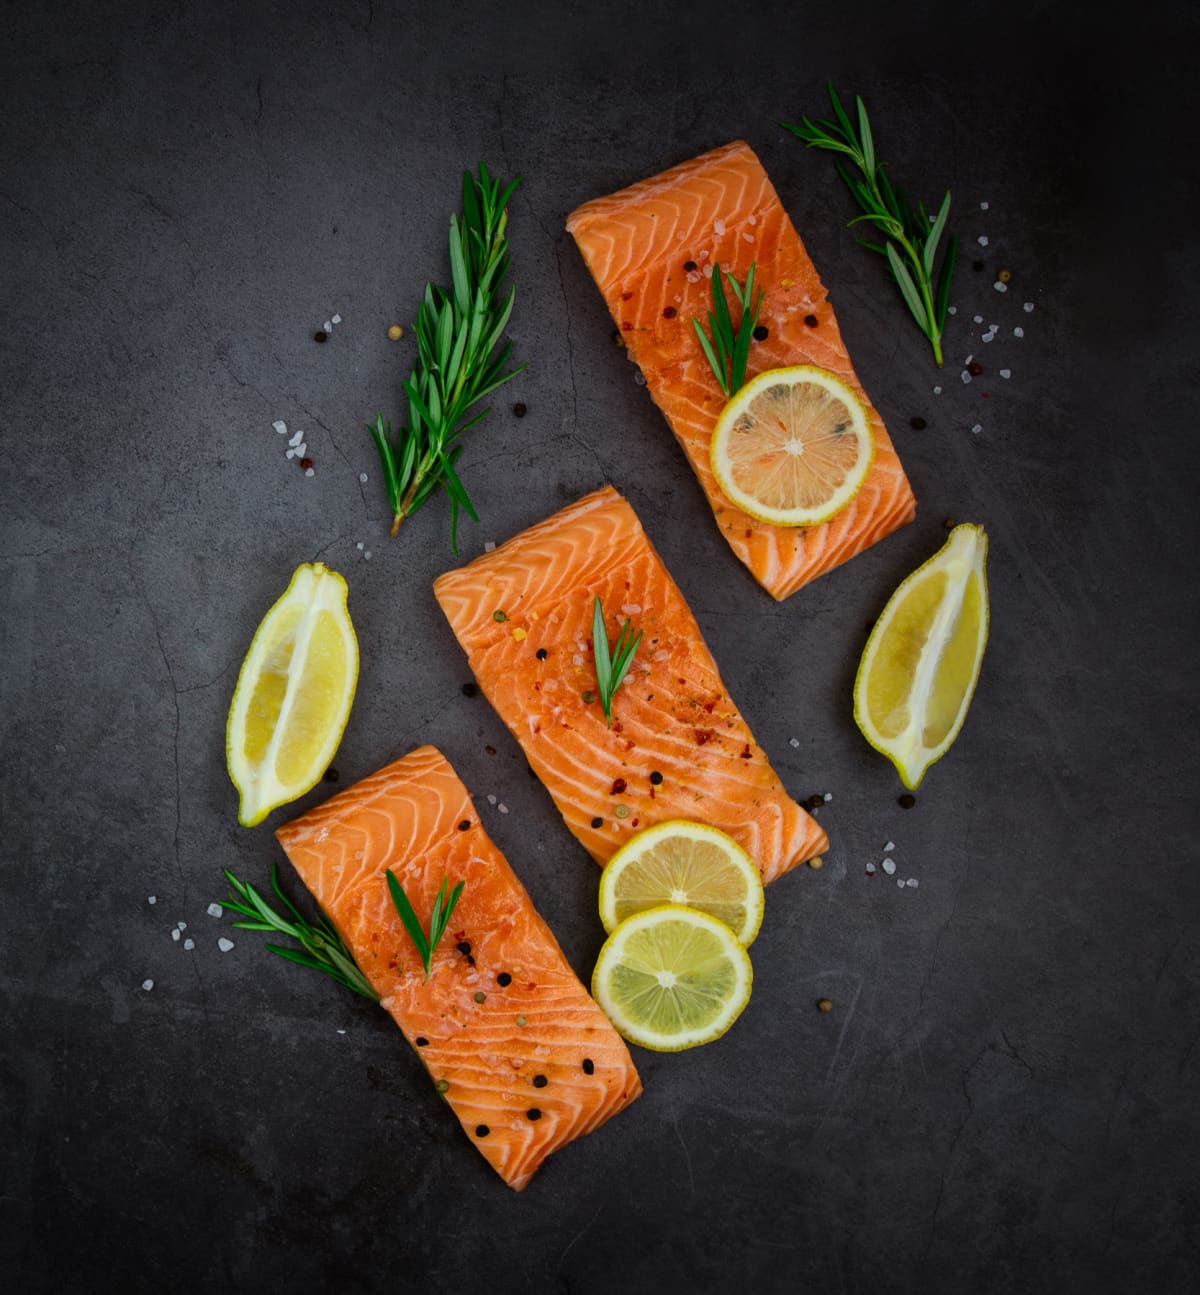 Salmon fillet steaks with lemon and herbs on a black background.